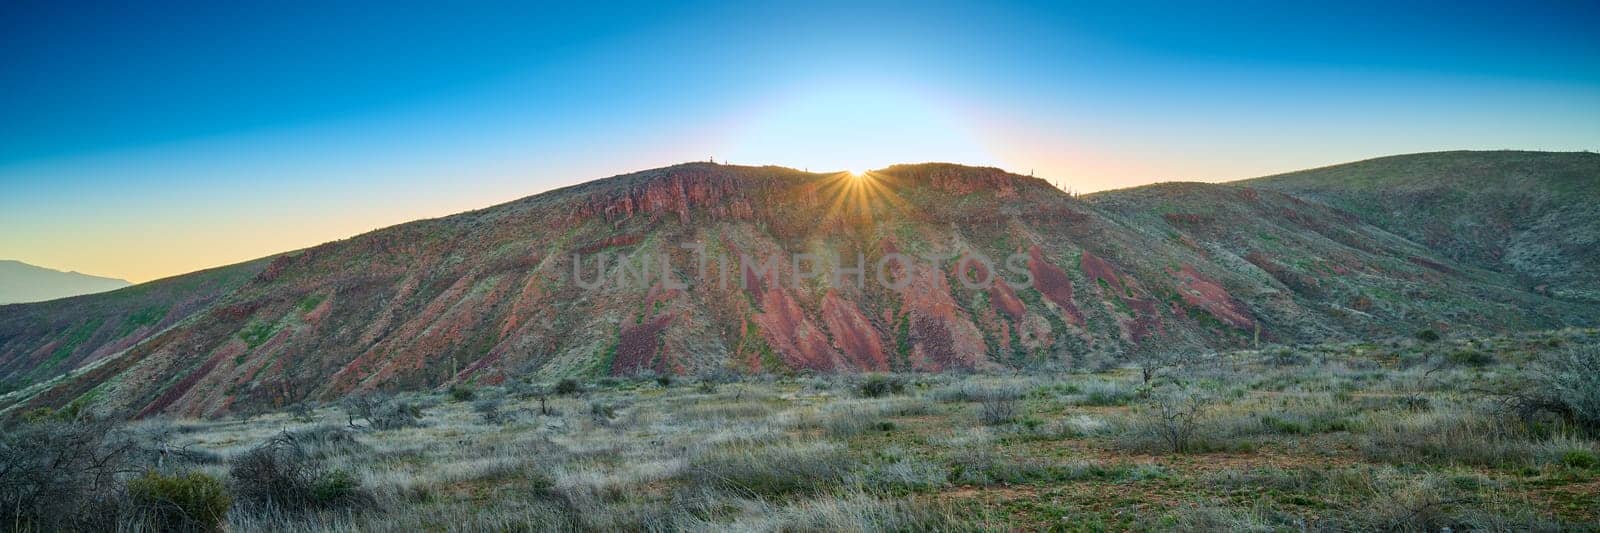 Sunrise over red rock cliffs in Tonto National Forest, Arizona. by patrickstock